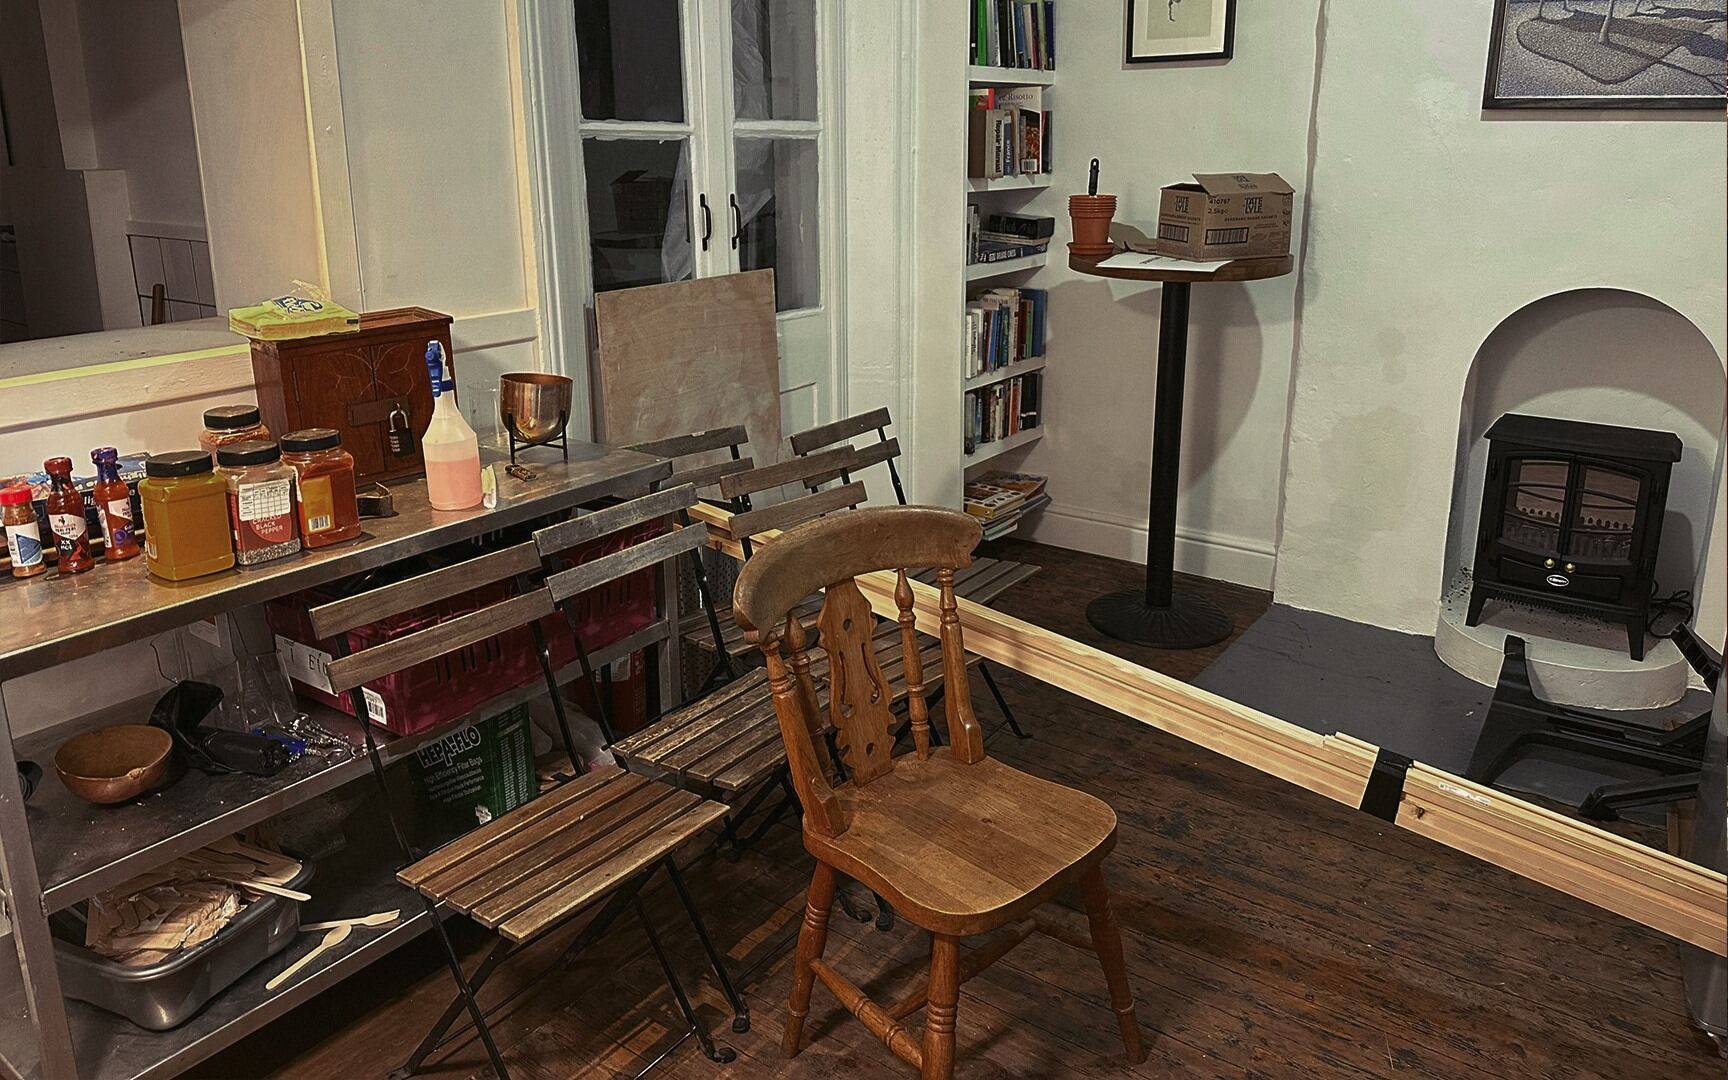 A collection of wooden chairs and bound planks of wood arranged in a kitchen space in front of a fireplace and table with various food jars.